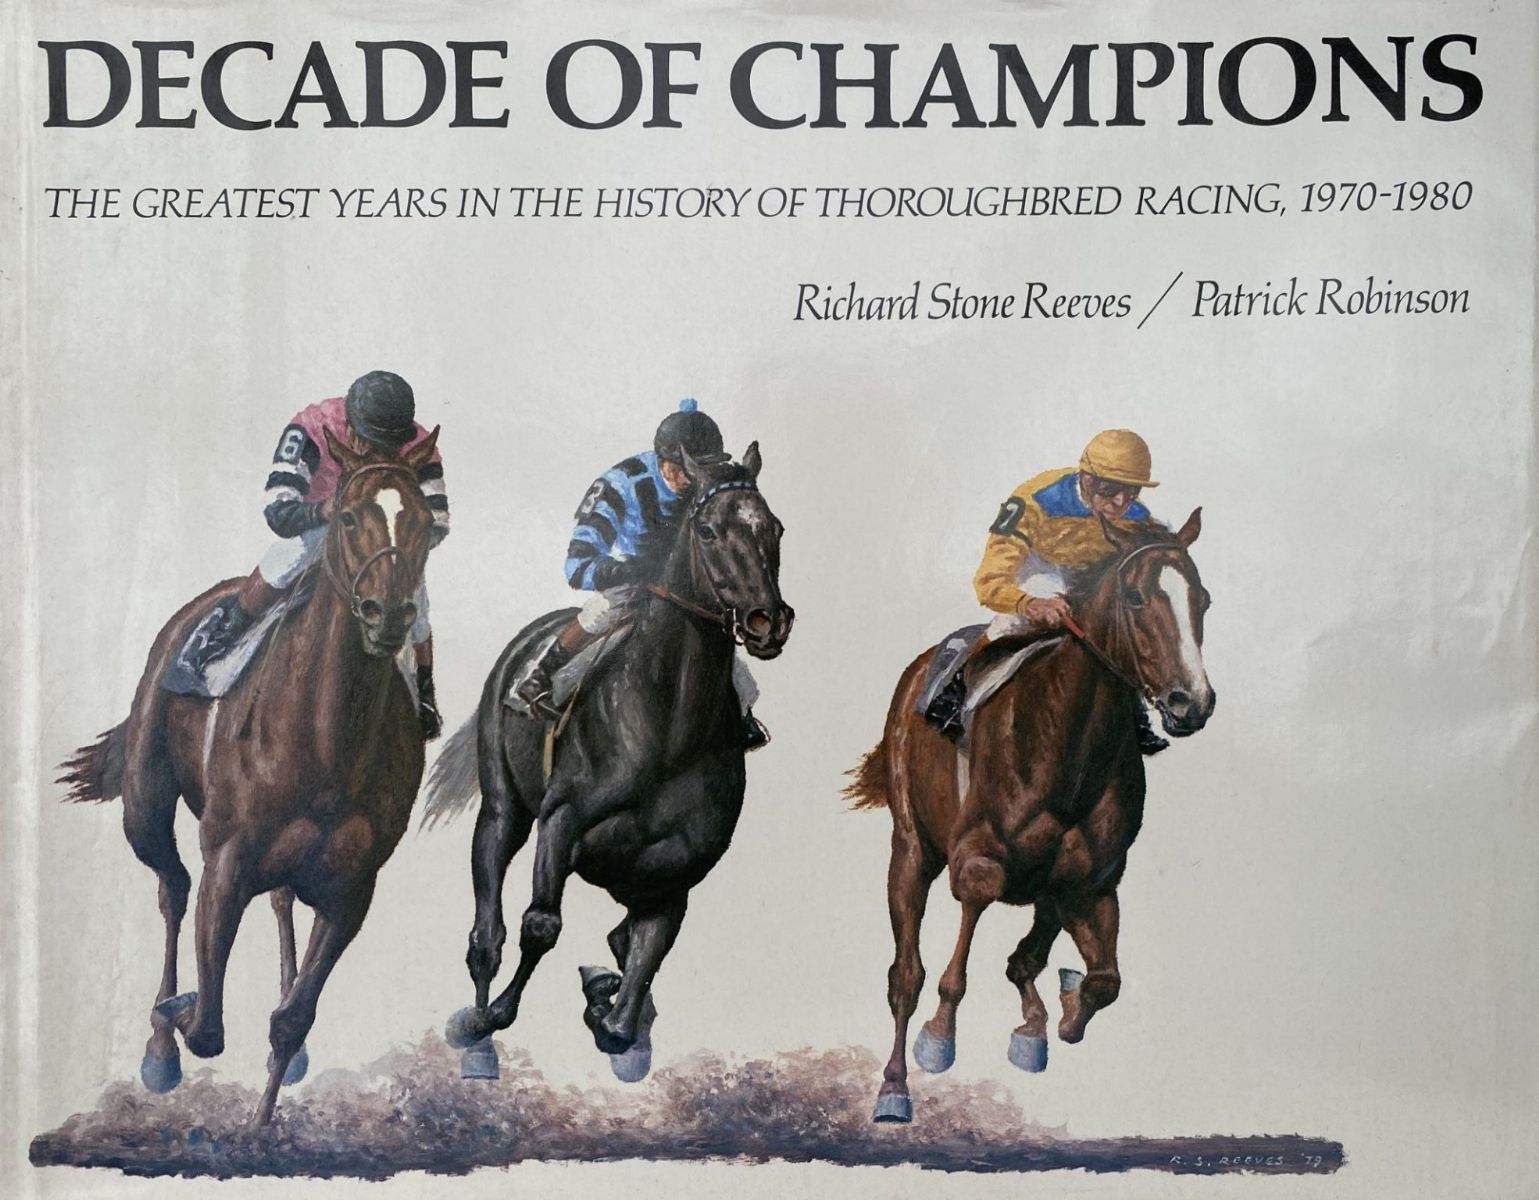 DECADE OF CHAMPIONS: The Greatest Years In The History of Thoroughbred Racing 1970-1980